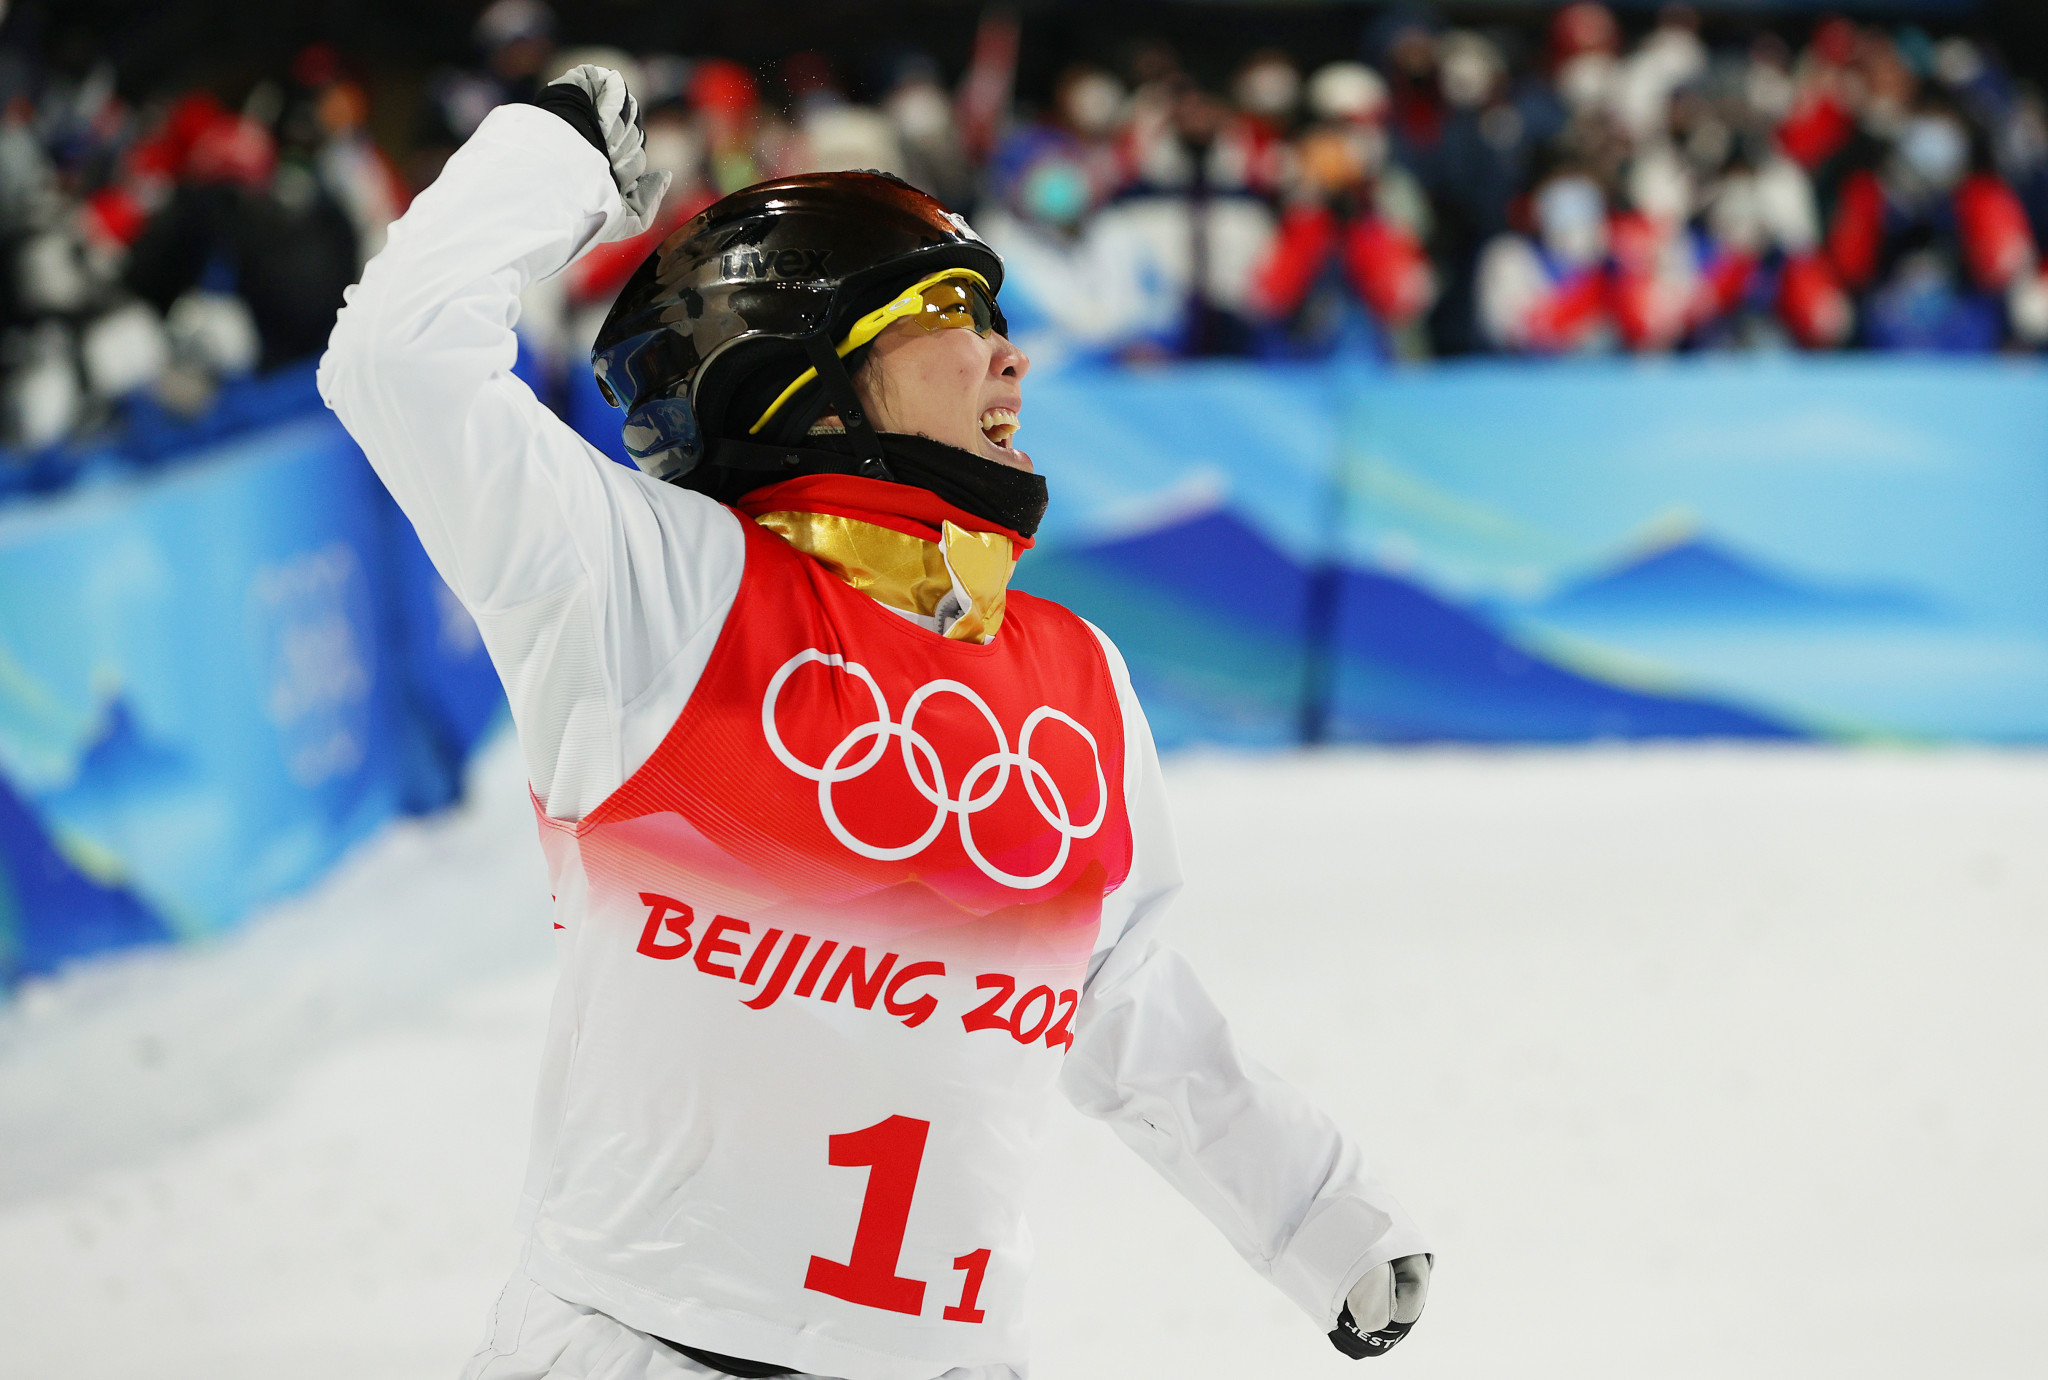 Xu Mengtao wins China's first women's aerials Olympic gold medal